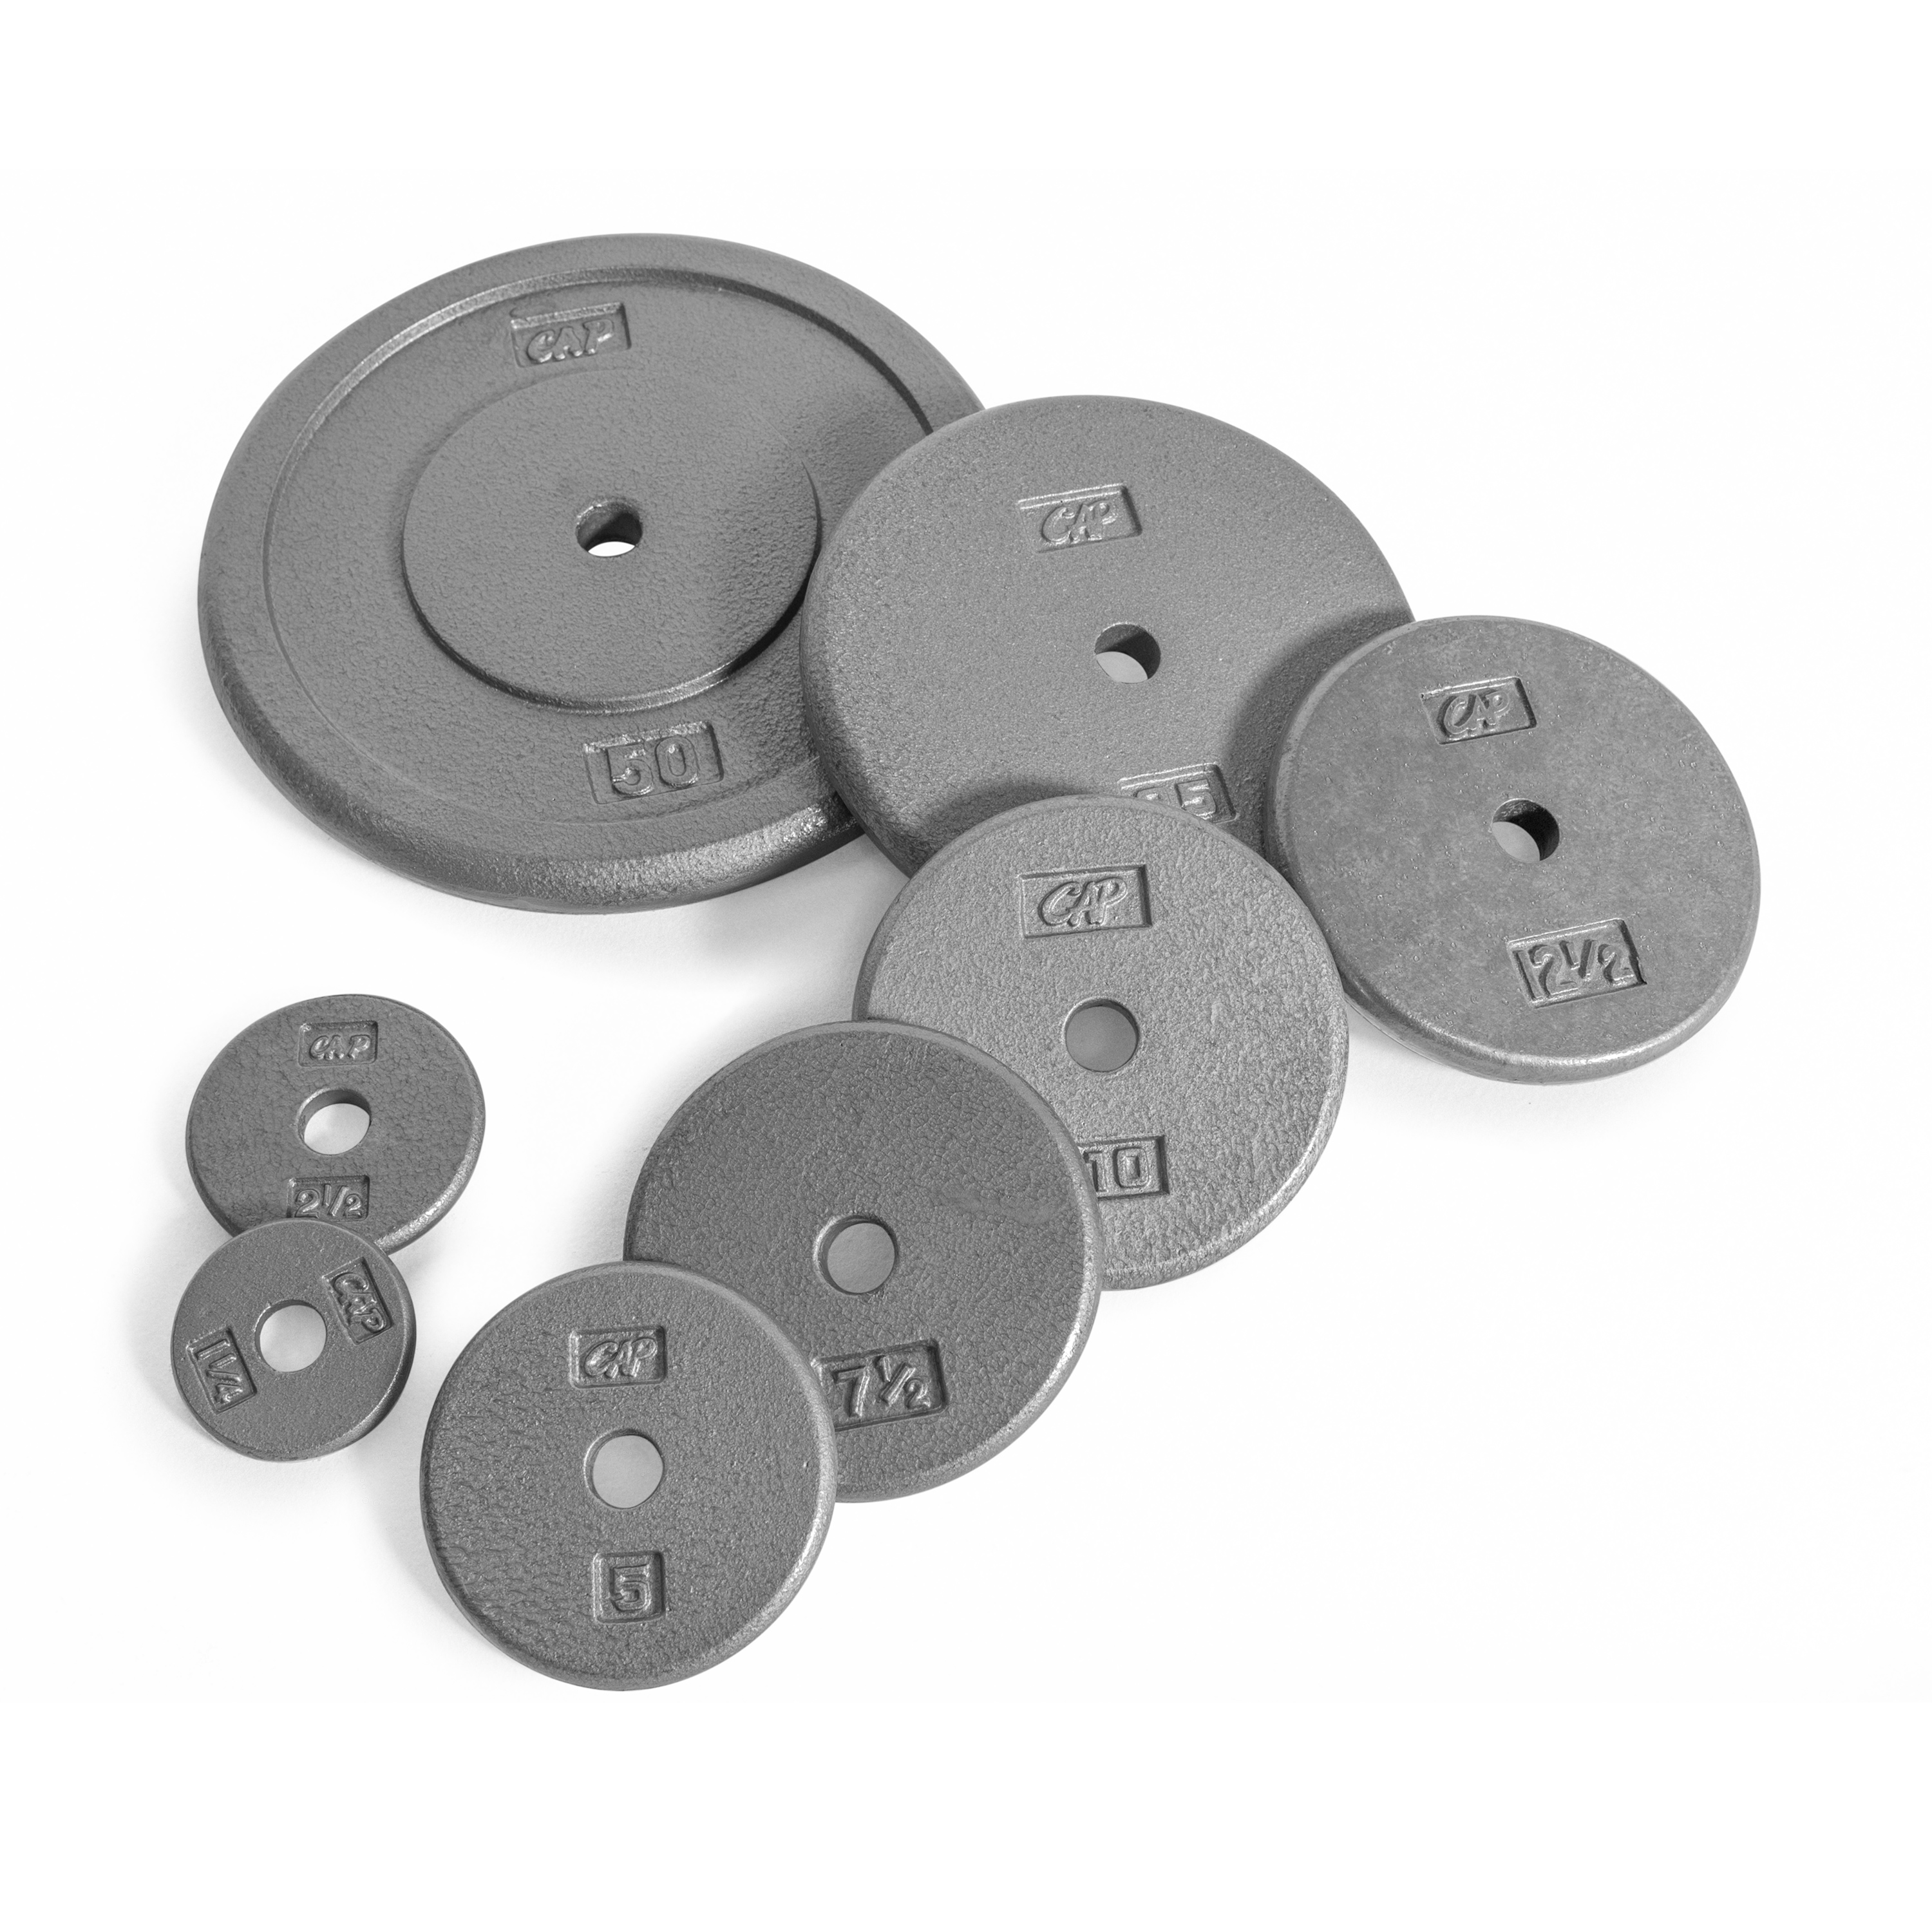 CAP Barbell Standard Cast Iron Weight Plate, 1.25-50 Lbs. Single - image 2 of 2